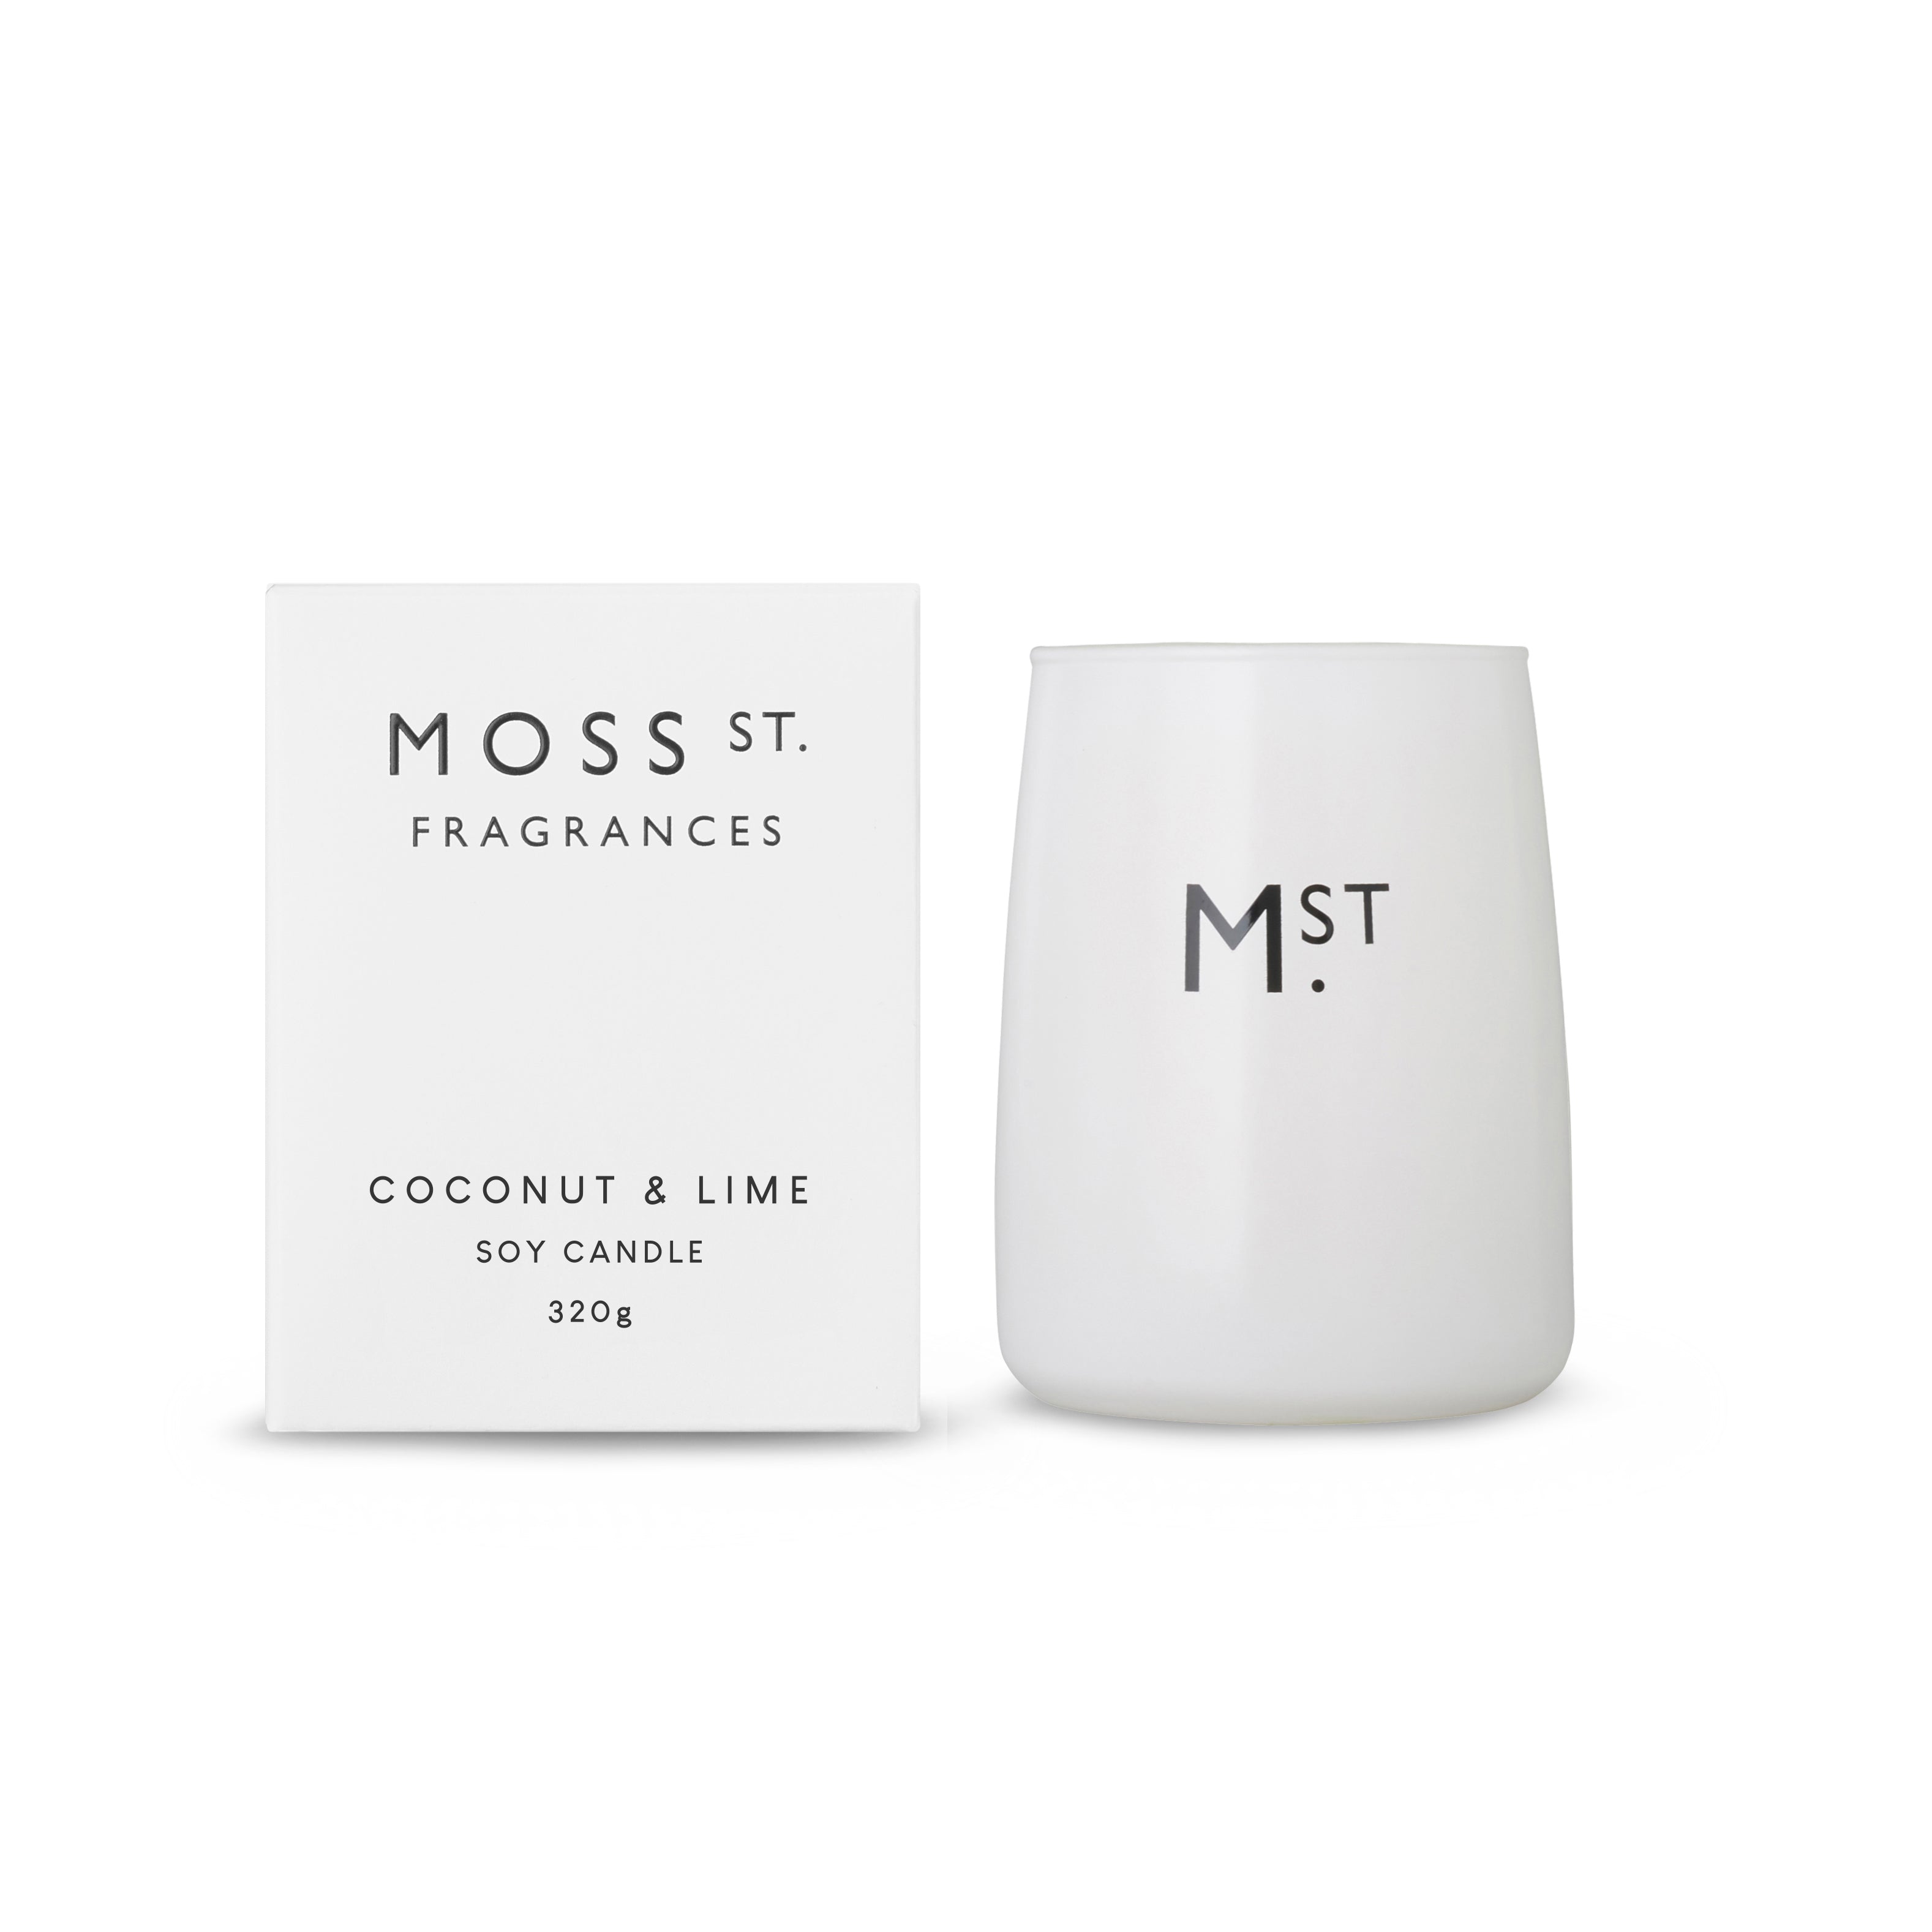 Moss St Coconut & Lime Soy Candle 320g